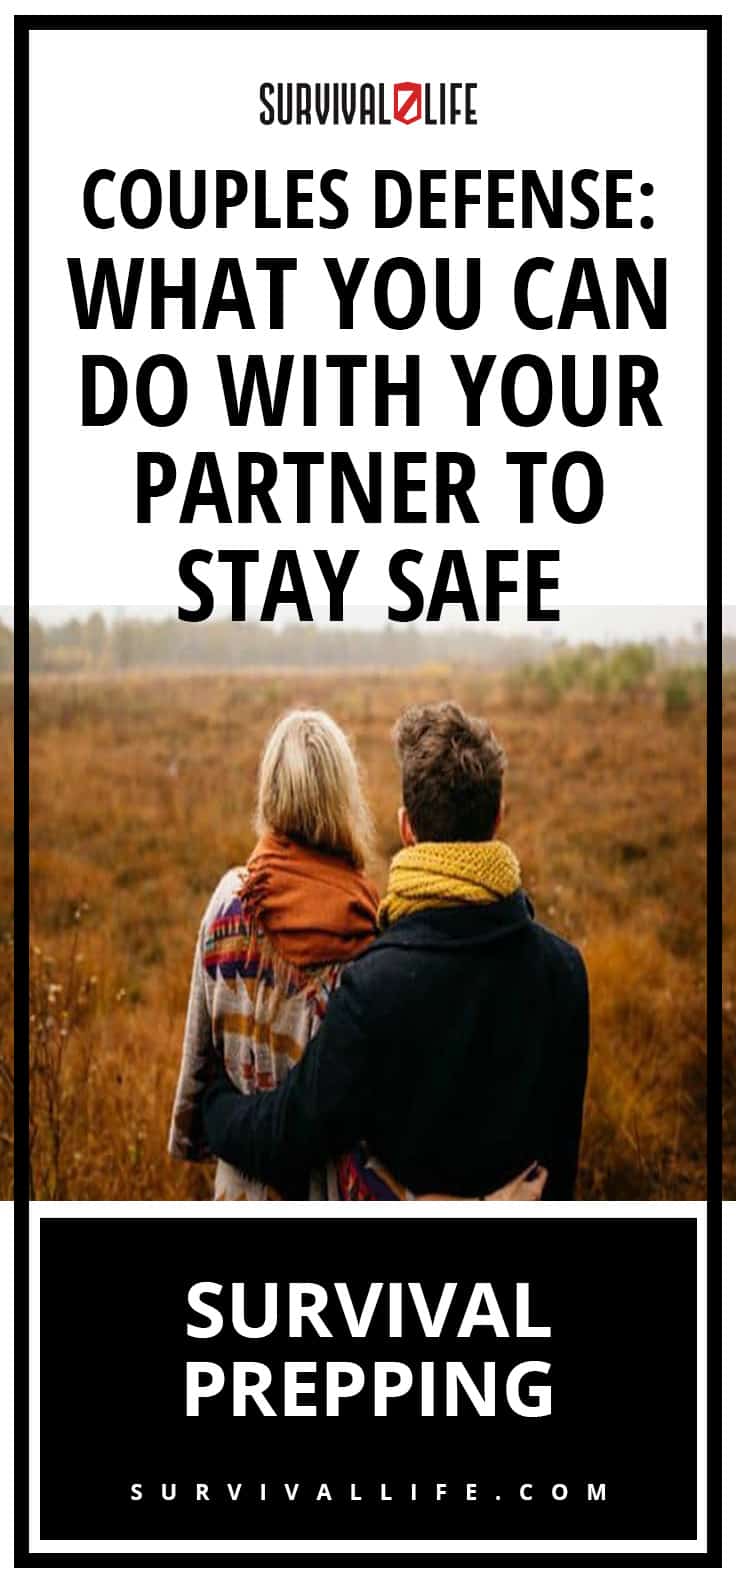 Placard | Couples Defense to stay safe | Couples Defense: What You Can Do With Your Partner To Stay Safe